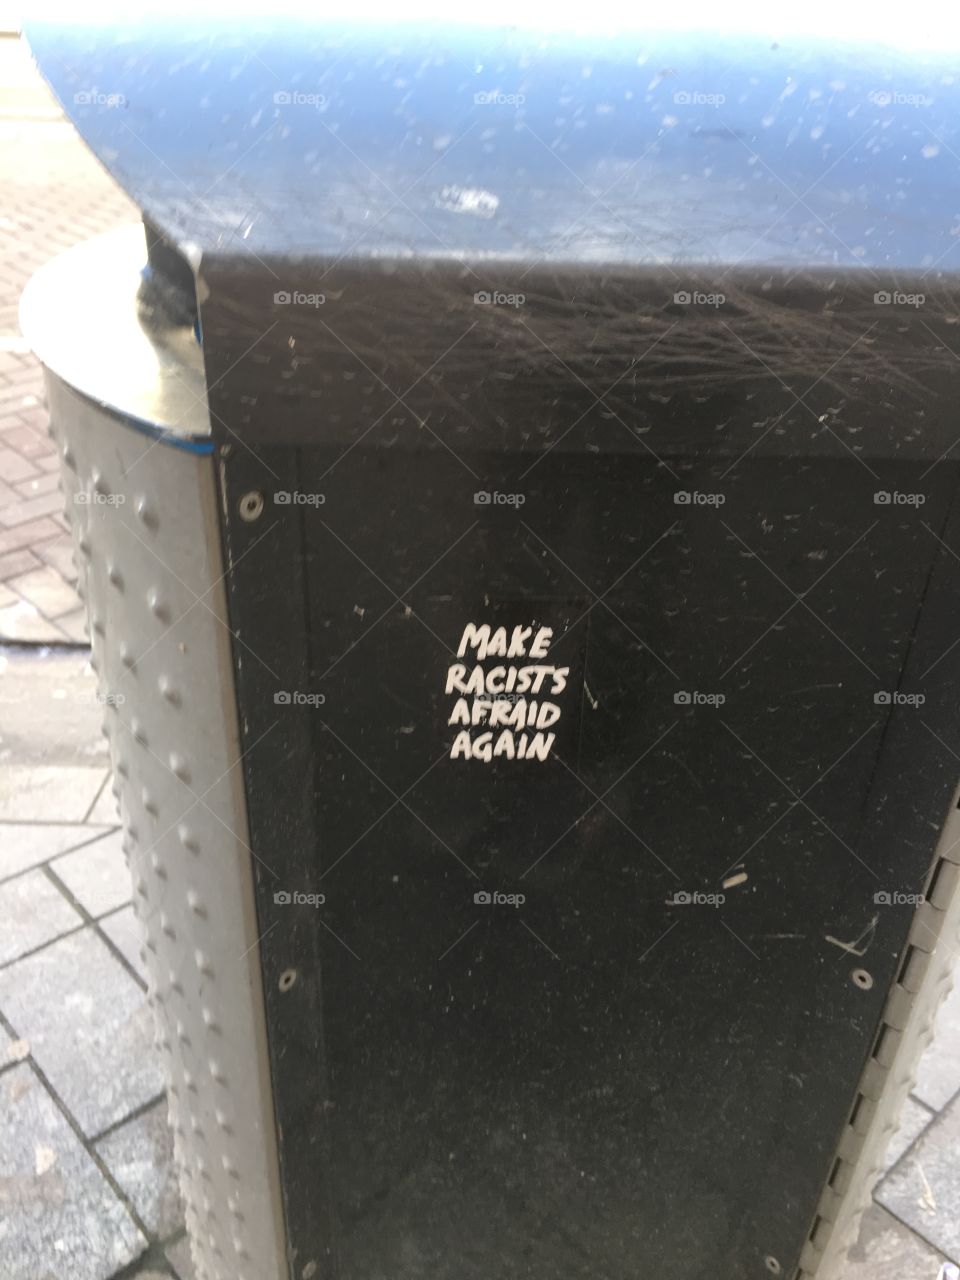 On a garbage can in Amsterdam 